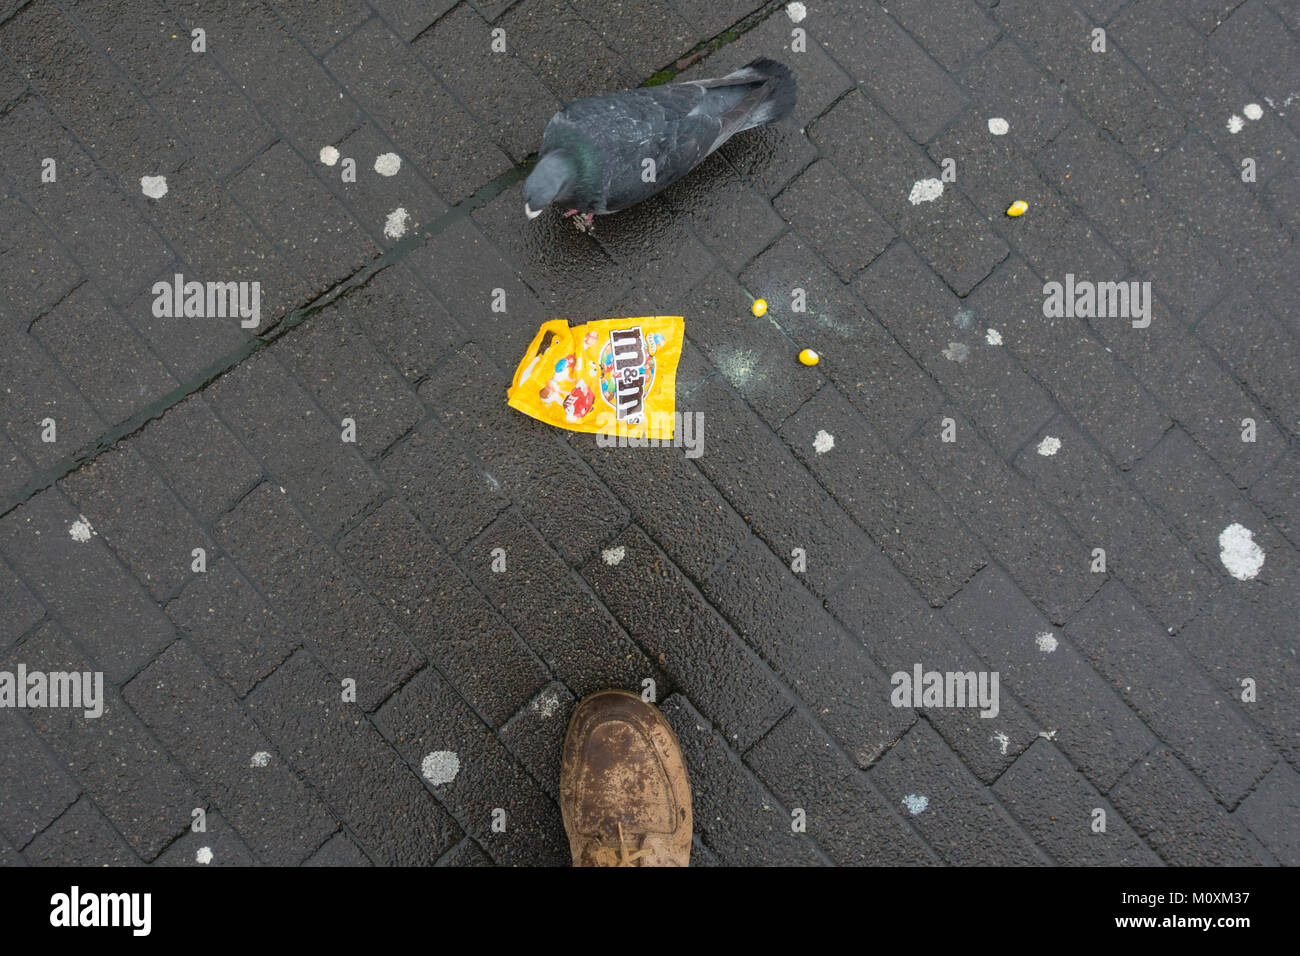 A pigeon eats from a bag of sweets Stock Photo